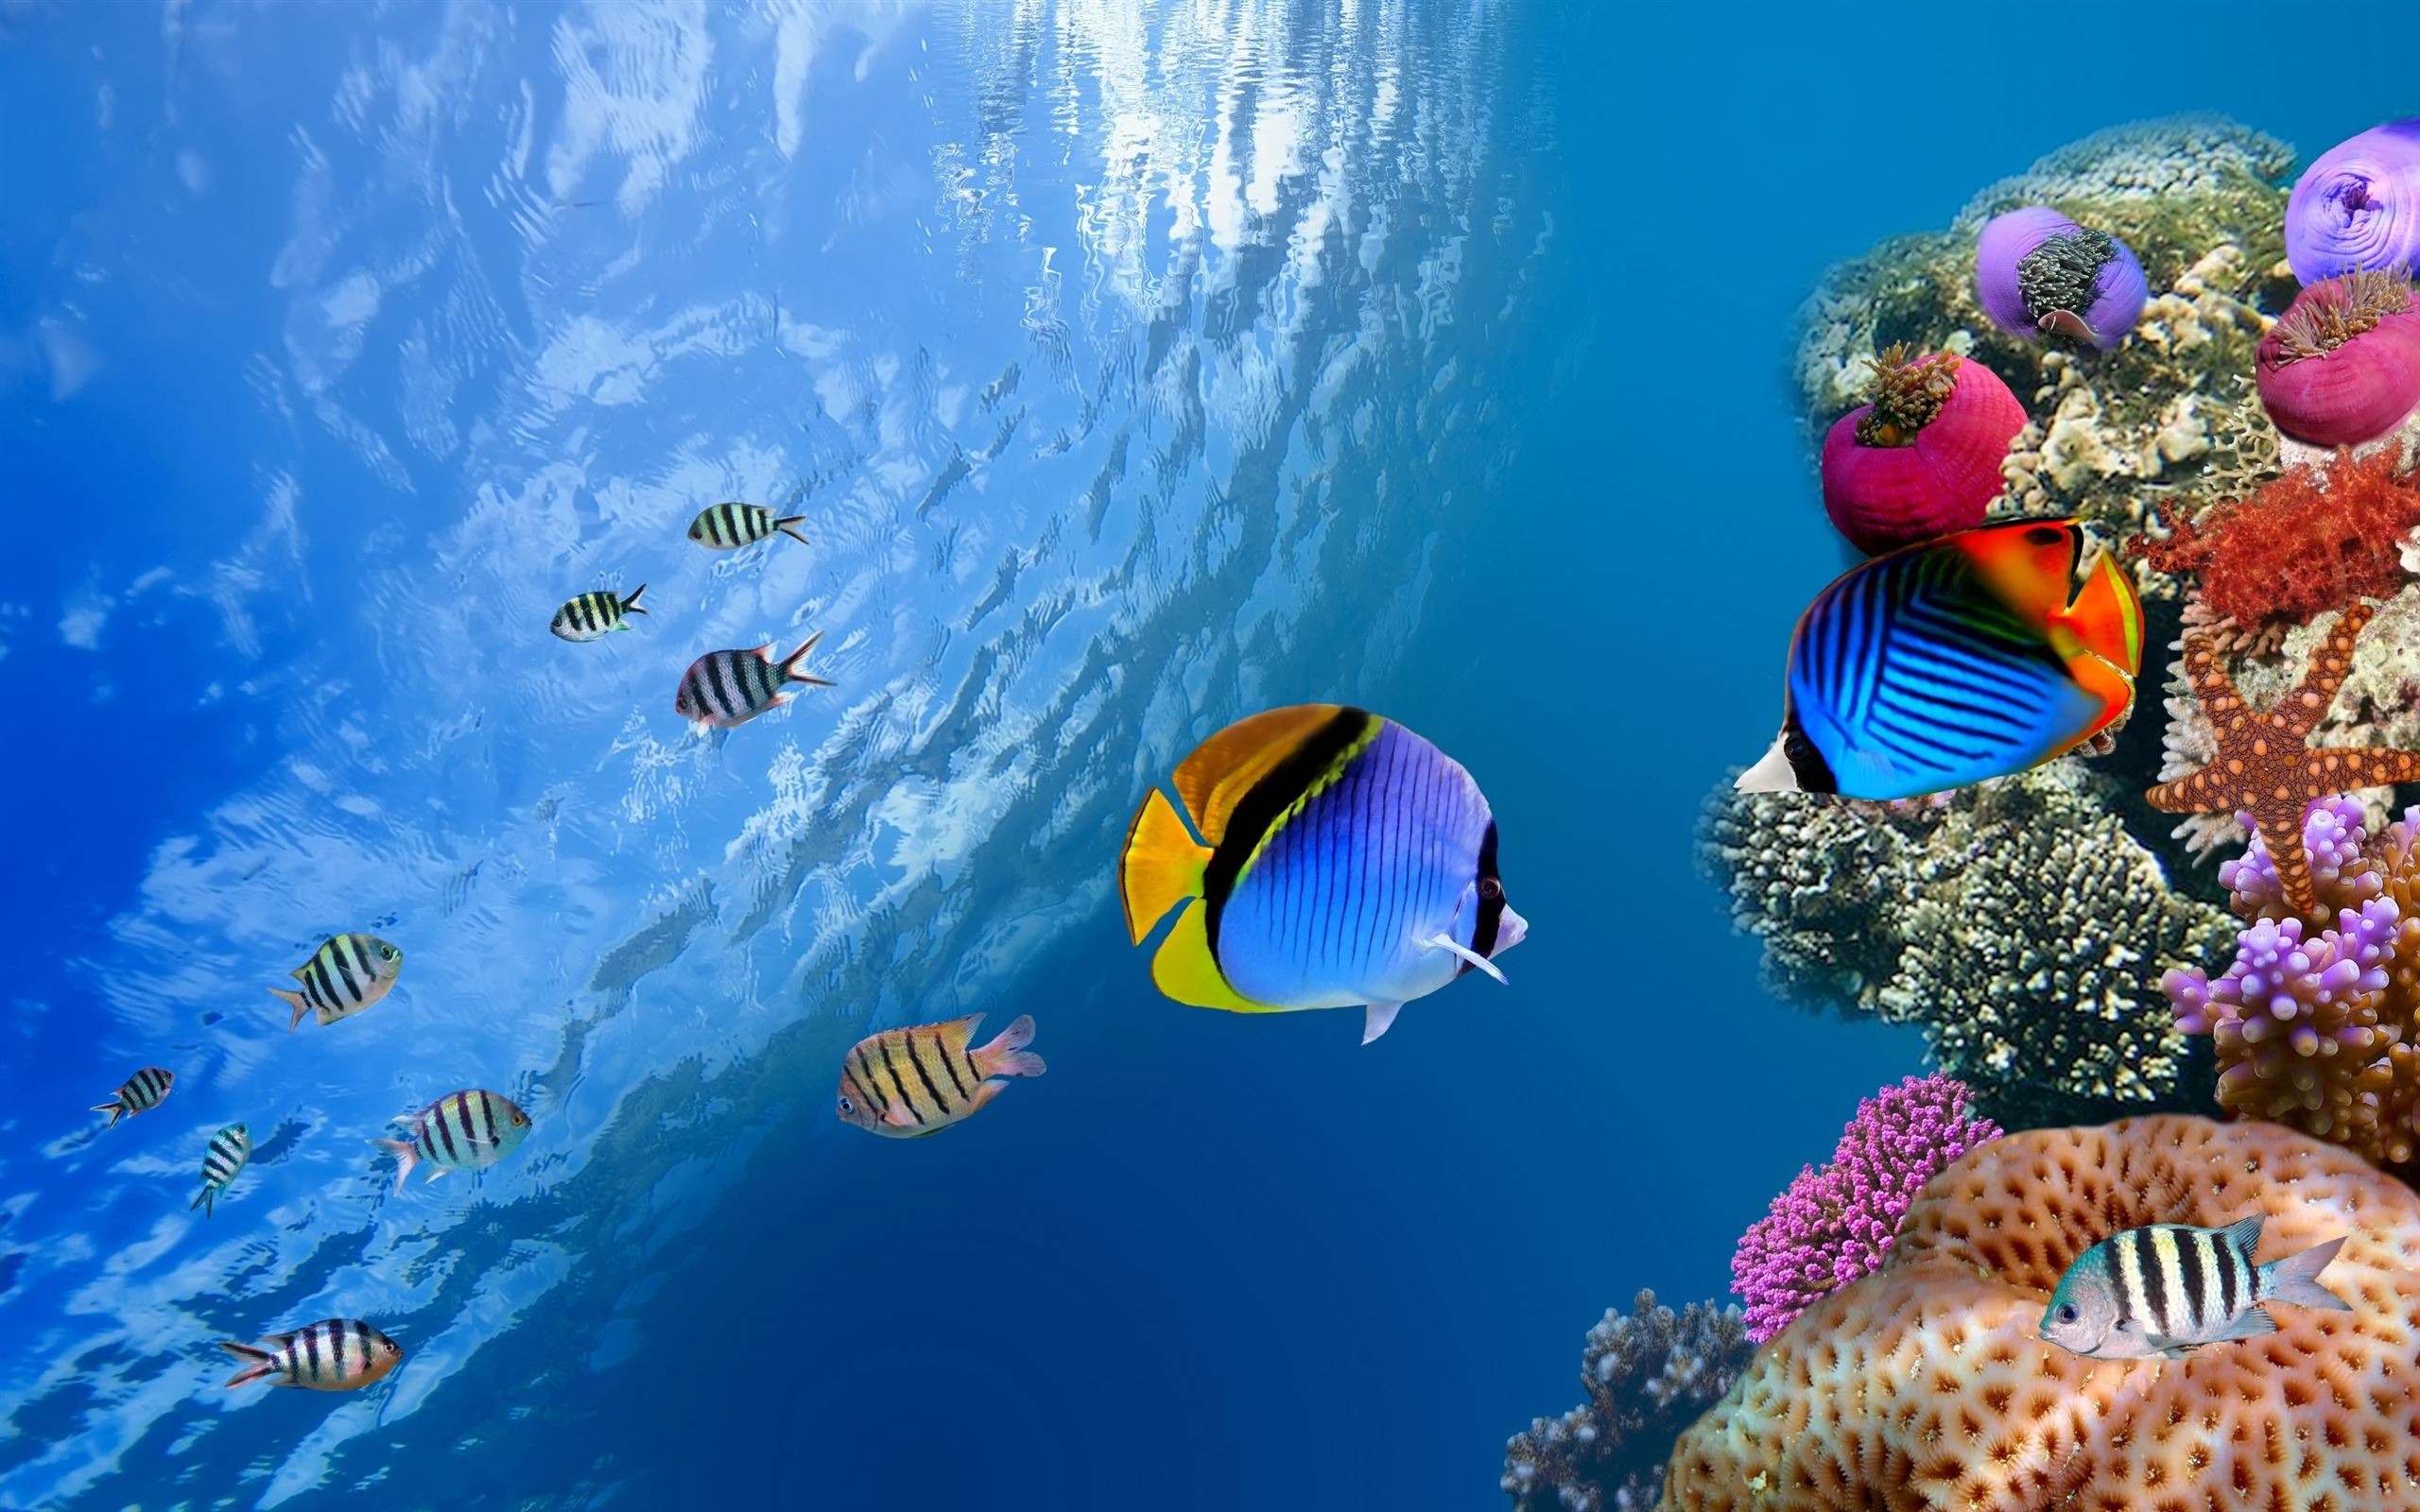 Fish swimming in the ocean with a coral reef in the background - Underwater